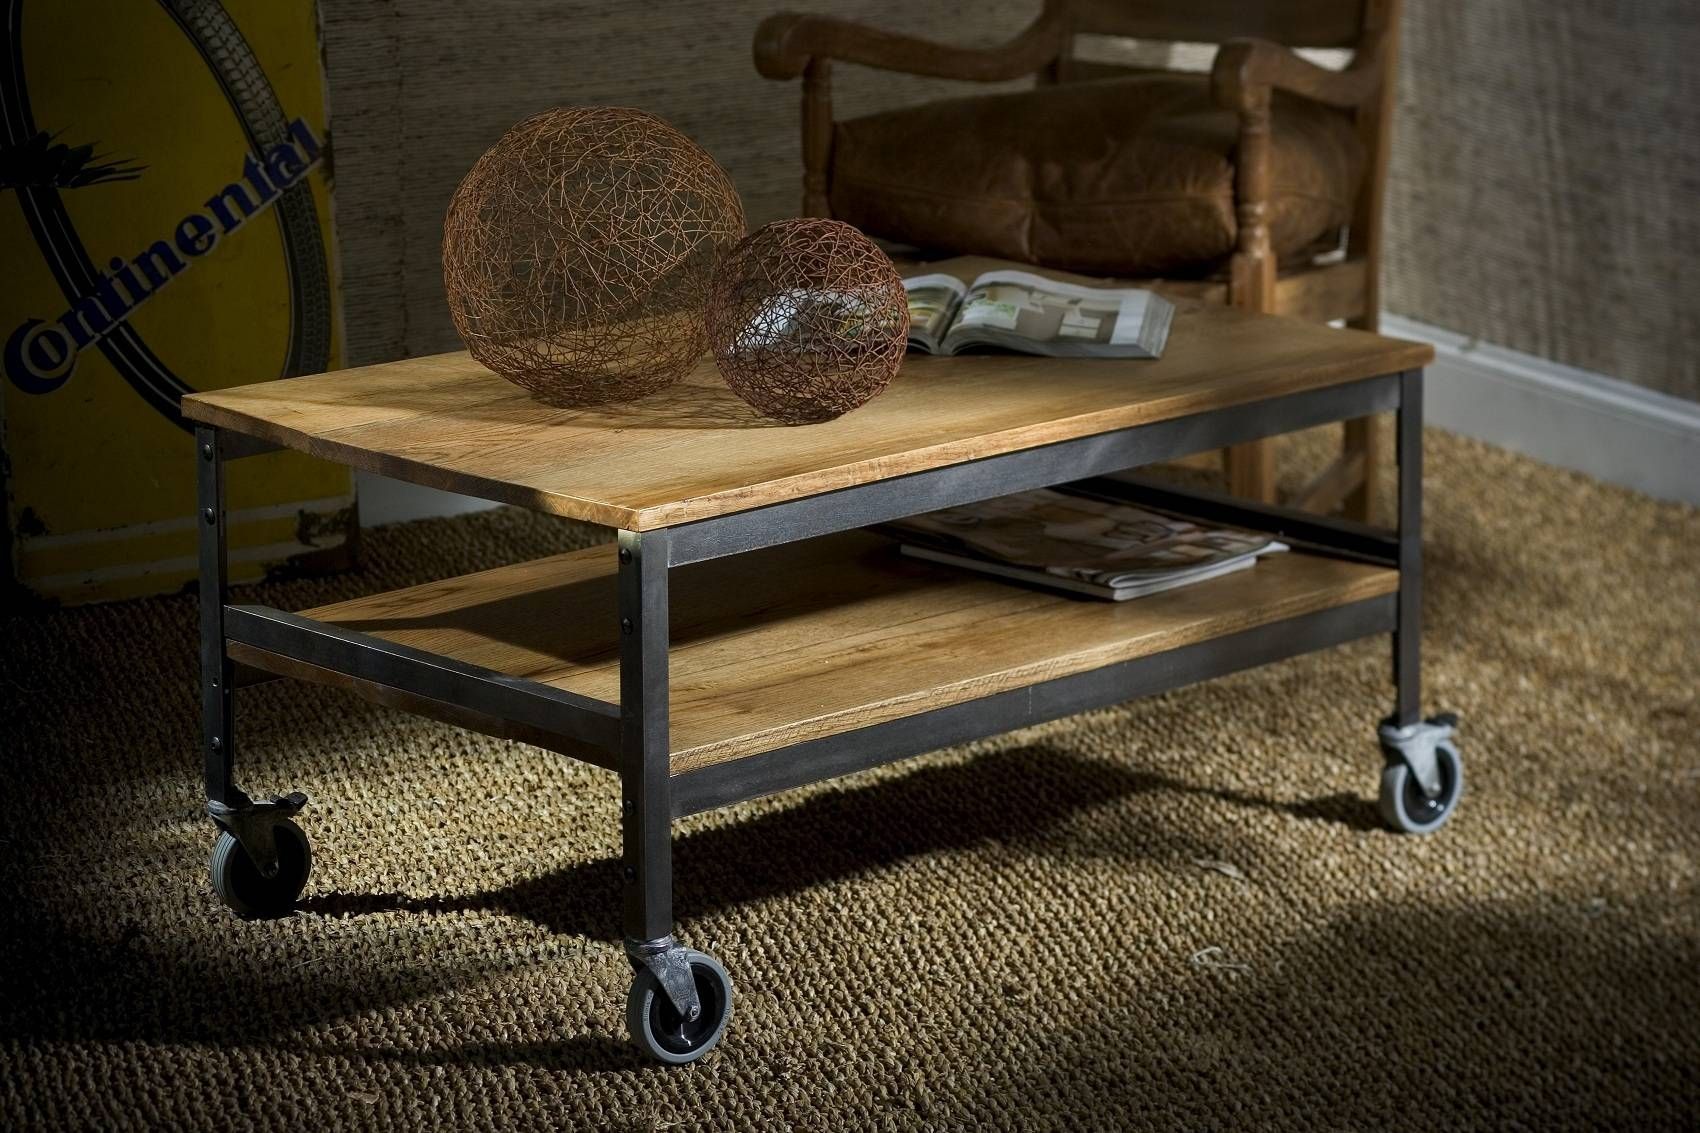 Rustic Farmhouse Coffee Table Ideas Intended For Rustic Coffee Tables With Bottom Shelf (View 29 of 30)